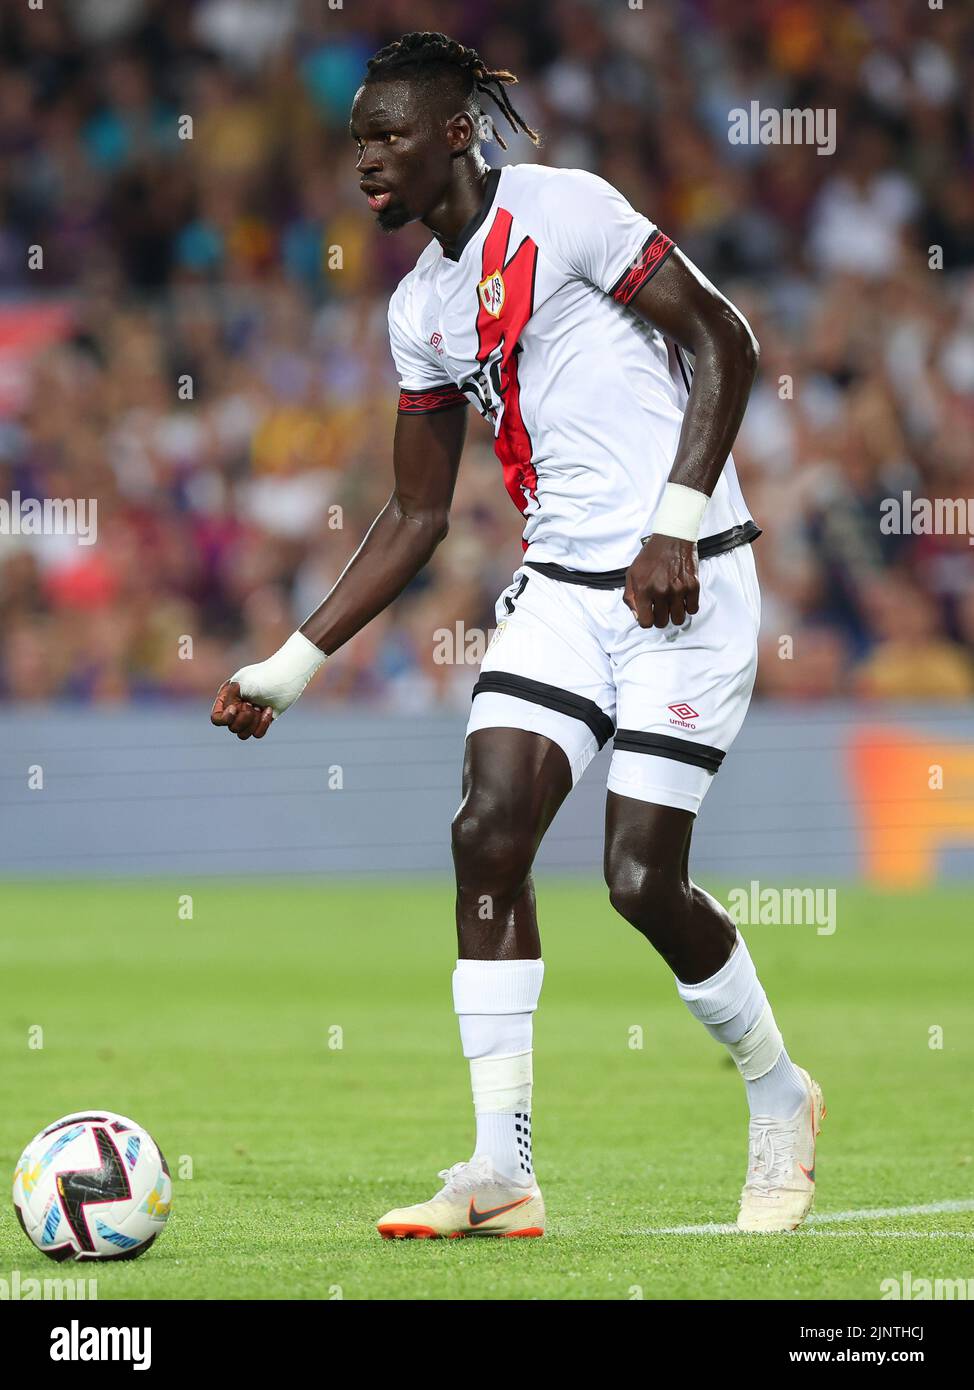 Pathe Ciss of Rayo Vallecano in action during the Liga match between FC Barcelona and Rayo Vallecano at Spotify Camp Nou in Barcelona, Spain. Stock Photo